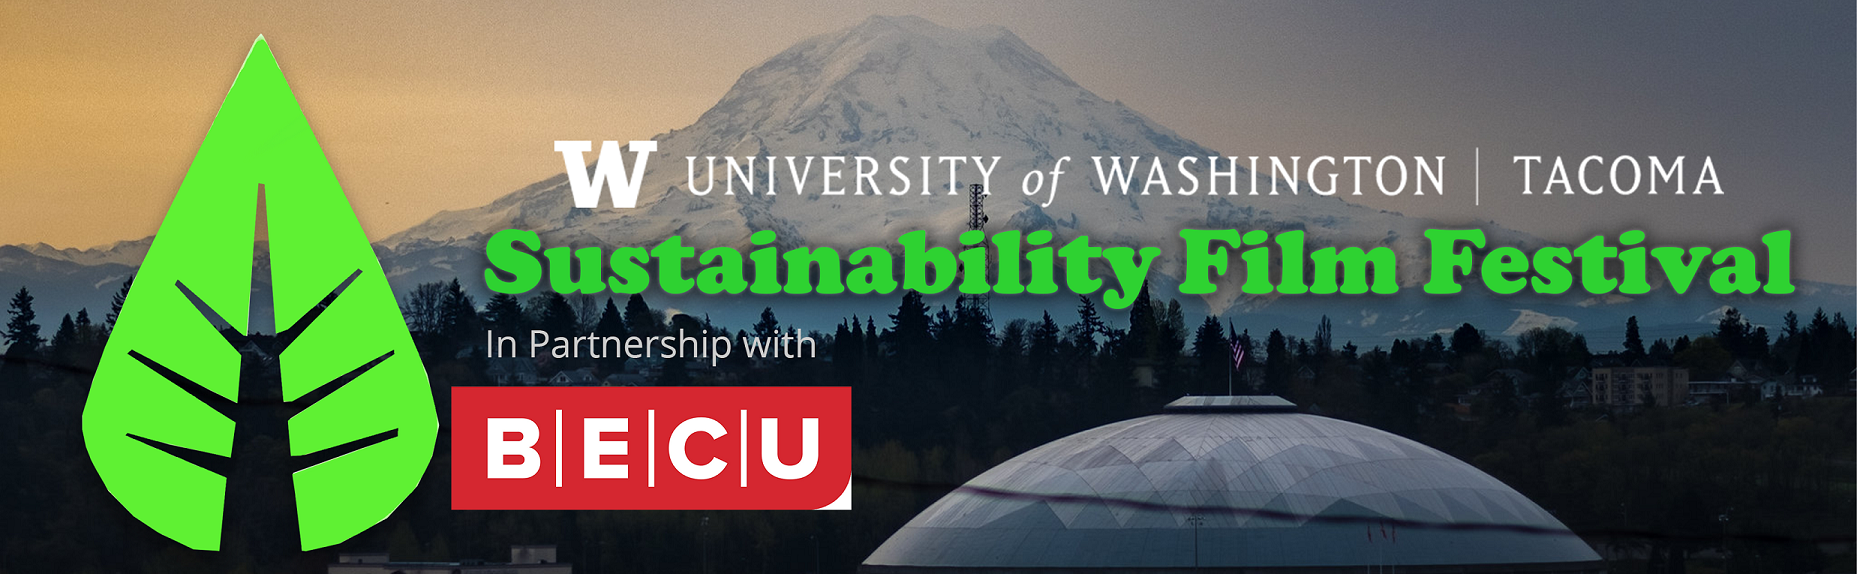 Picture of Mount Rainier and the Tacoma Dome in the background of the words University of Washington Tacoma Sustainability Film Festival. Included are the logos for the Sustainability Committee and BECU